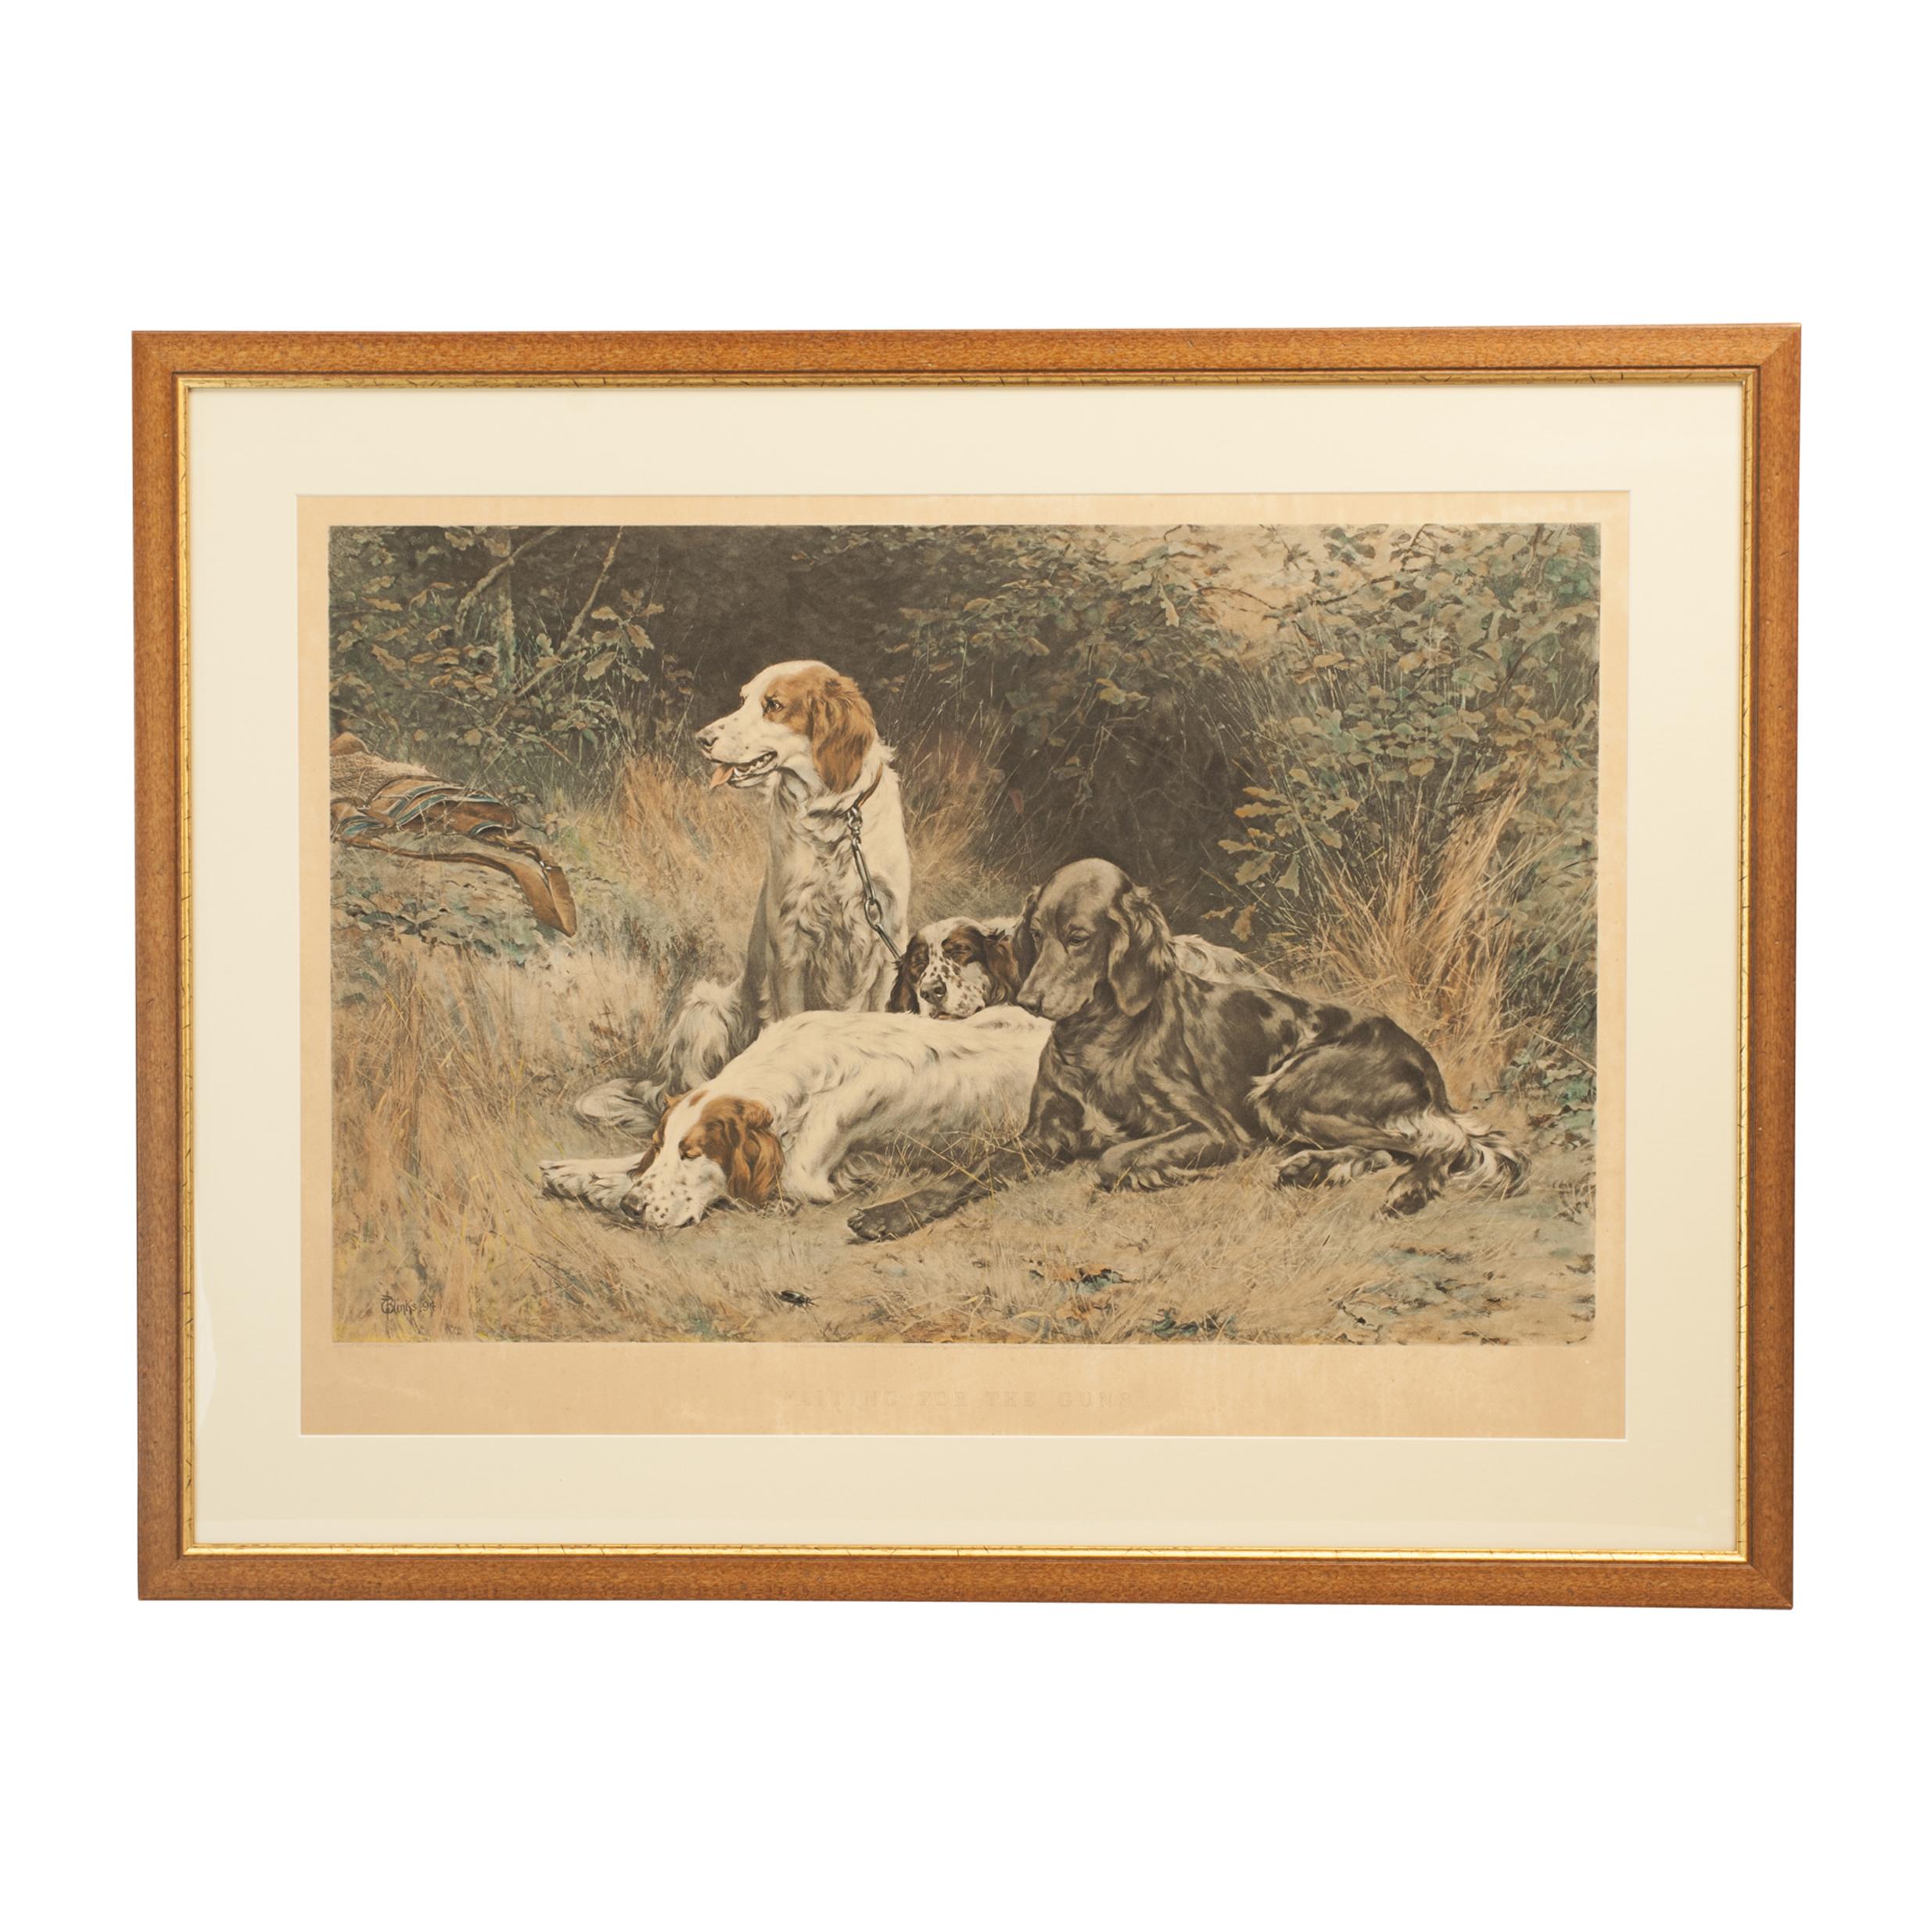 Thomas Blinks Photogravure, waiting for the guns.
A wonderful titled color photogravure of four hunting dogs, setters, after Thomas Blinks original painting, waiting for the guns. Framed and mounted in a modern wooden frame with gold slip.